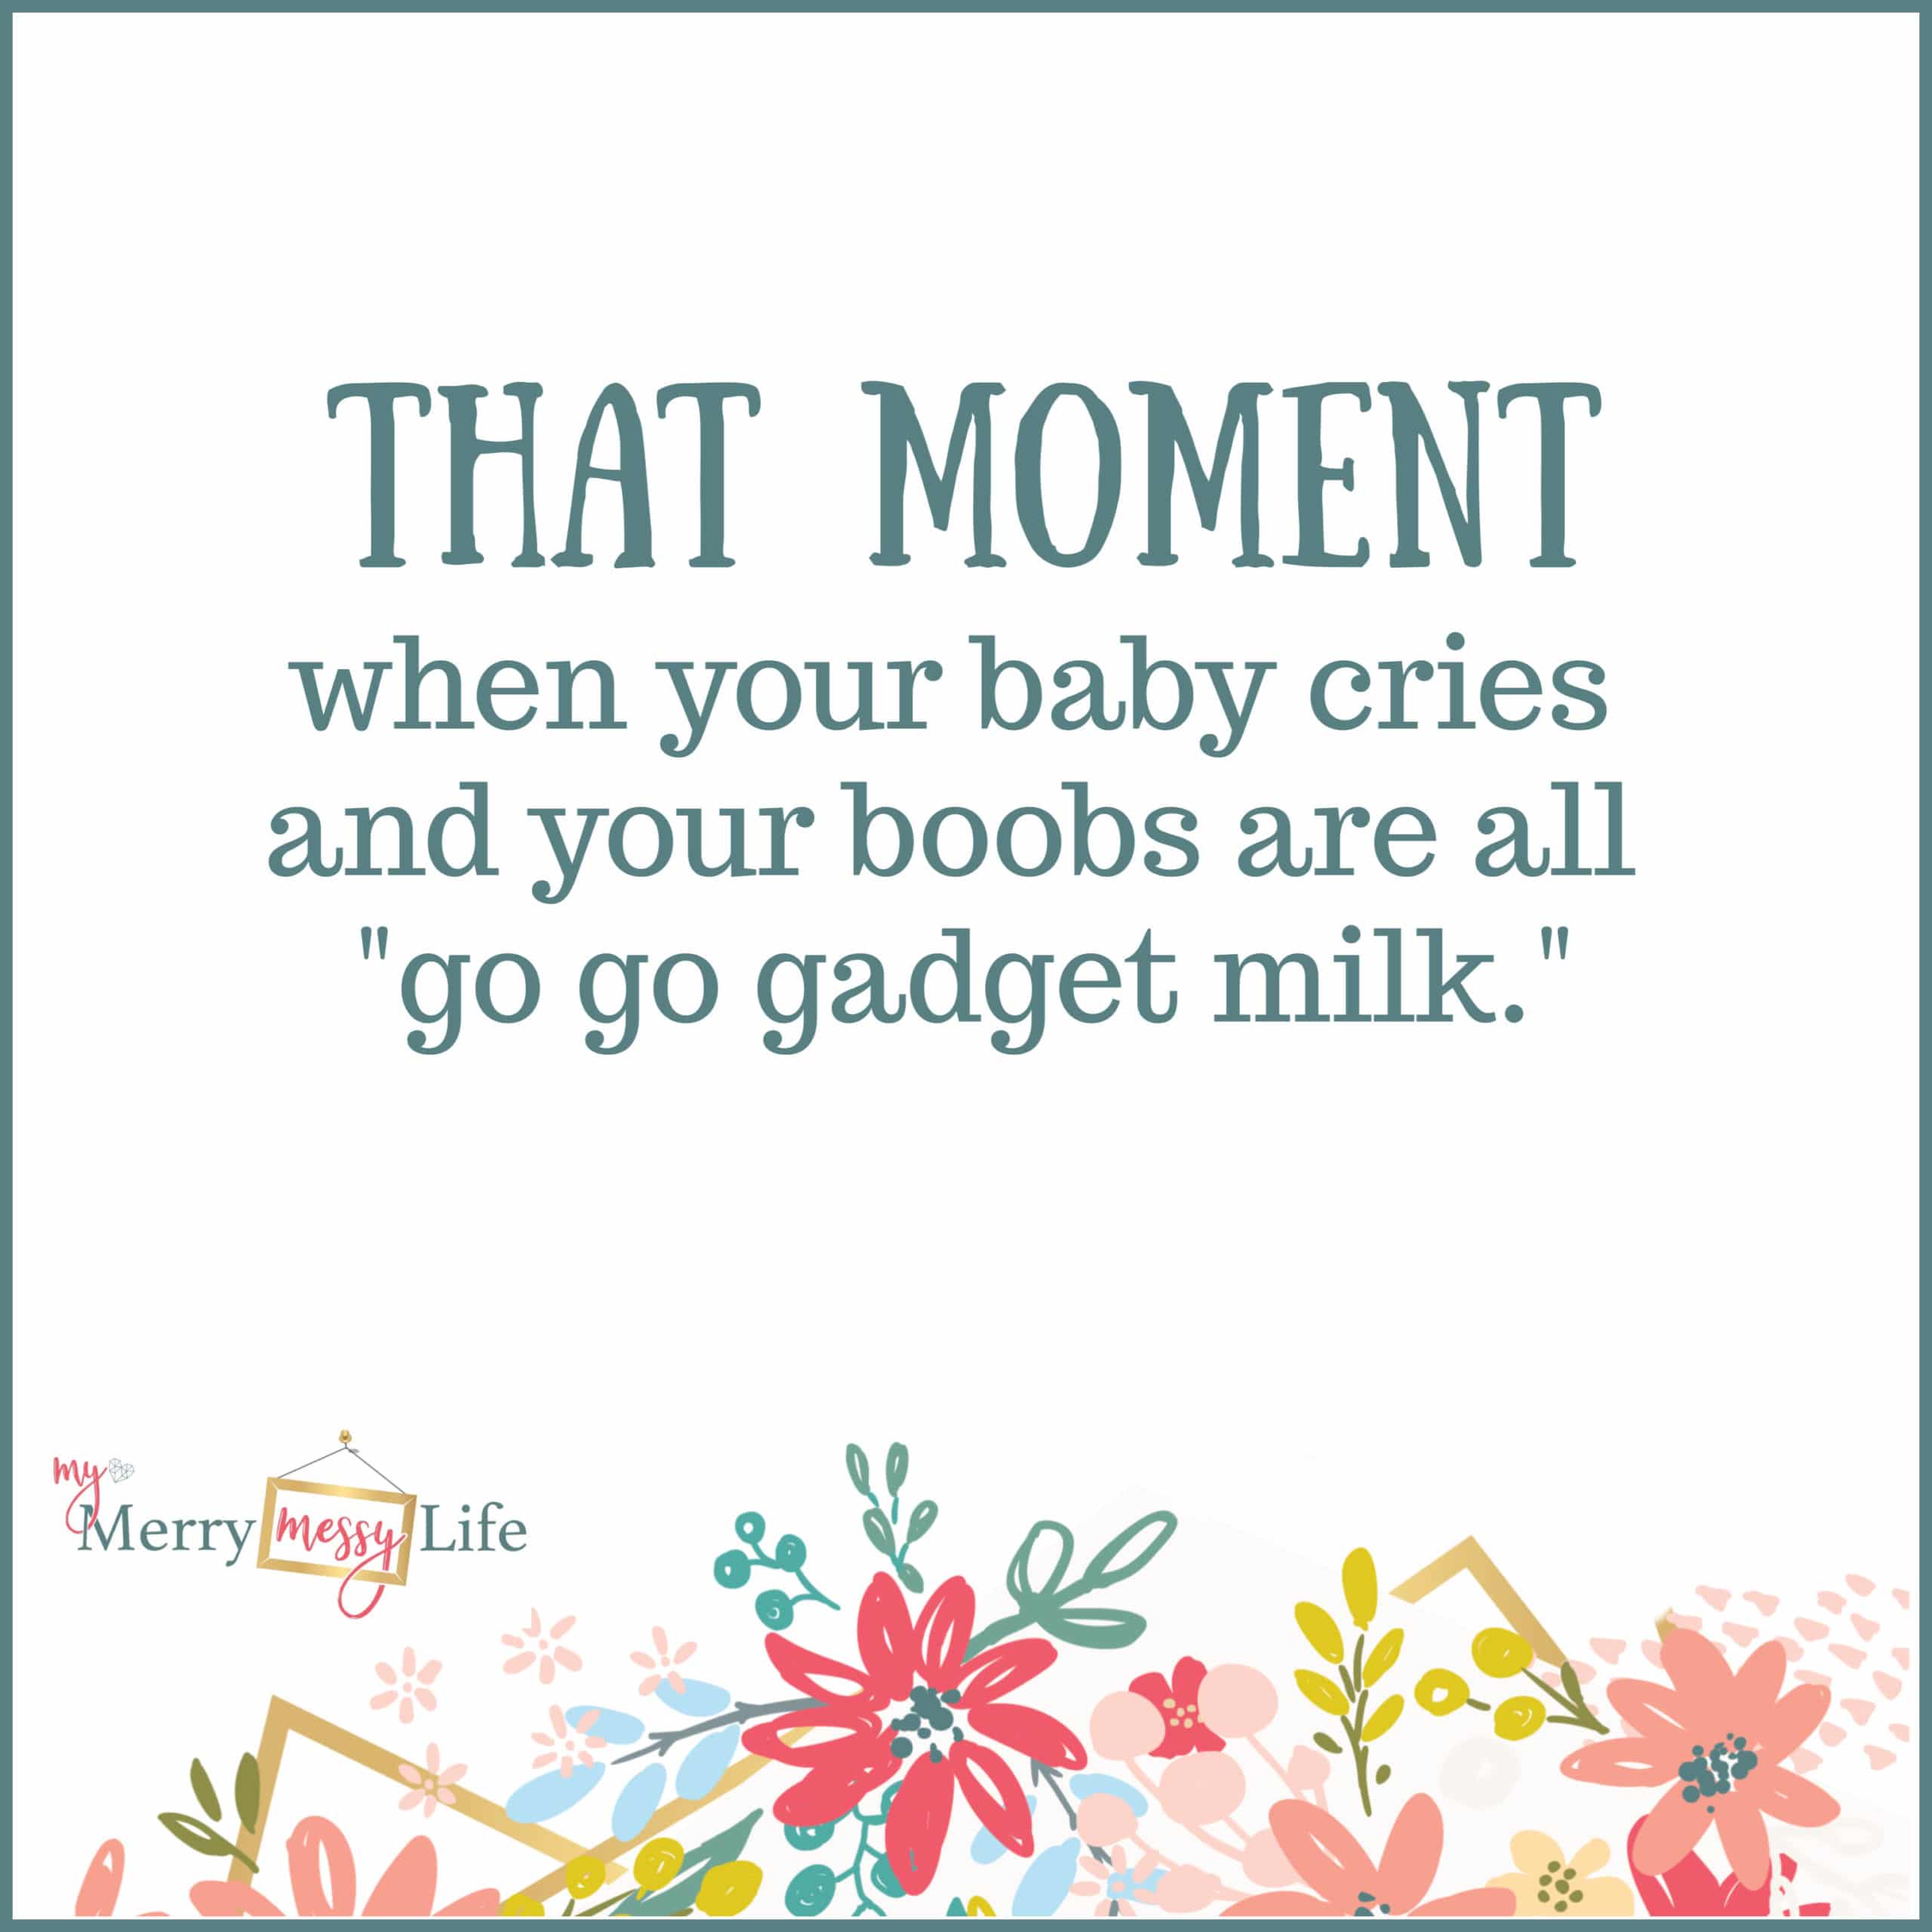 Funny Mom Memes about Baby Life – My Merry Messy Life